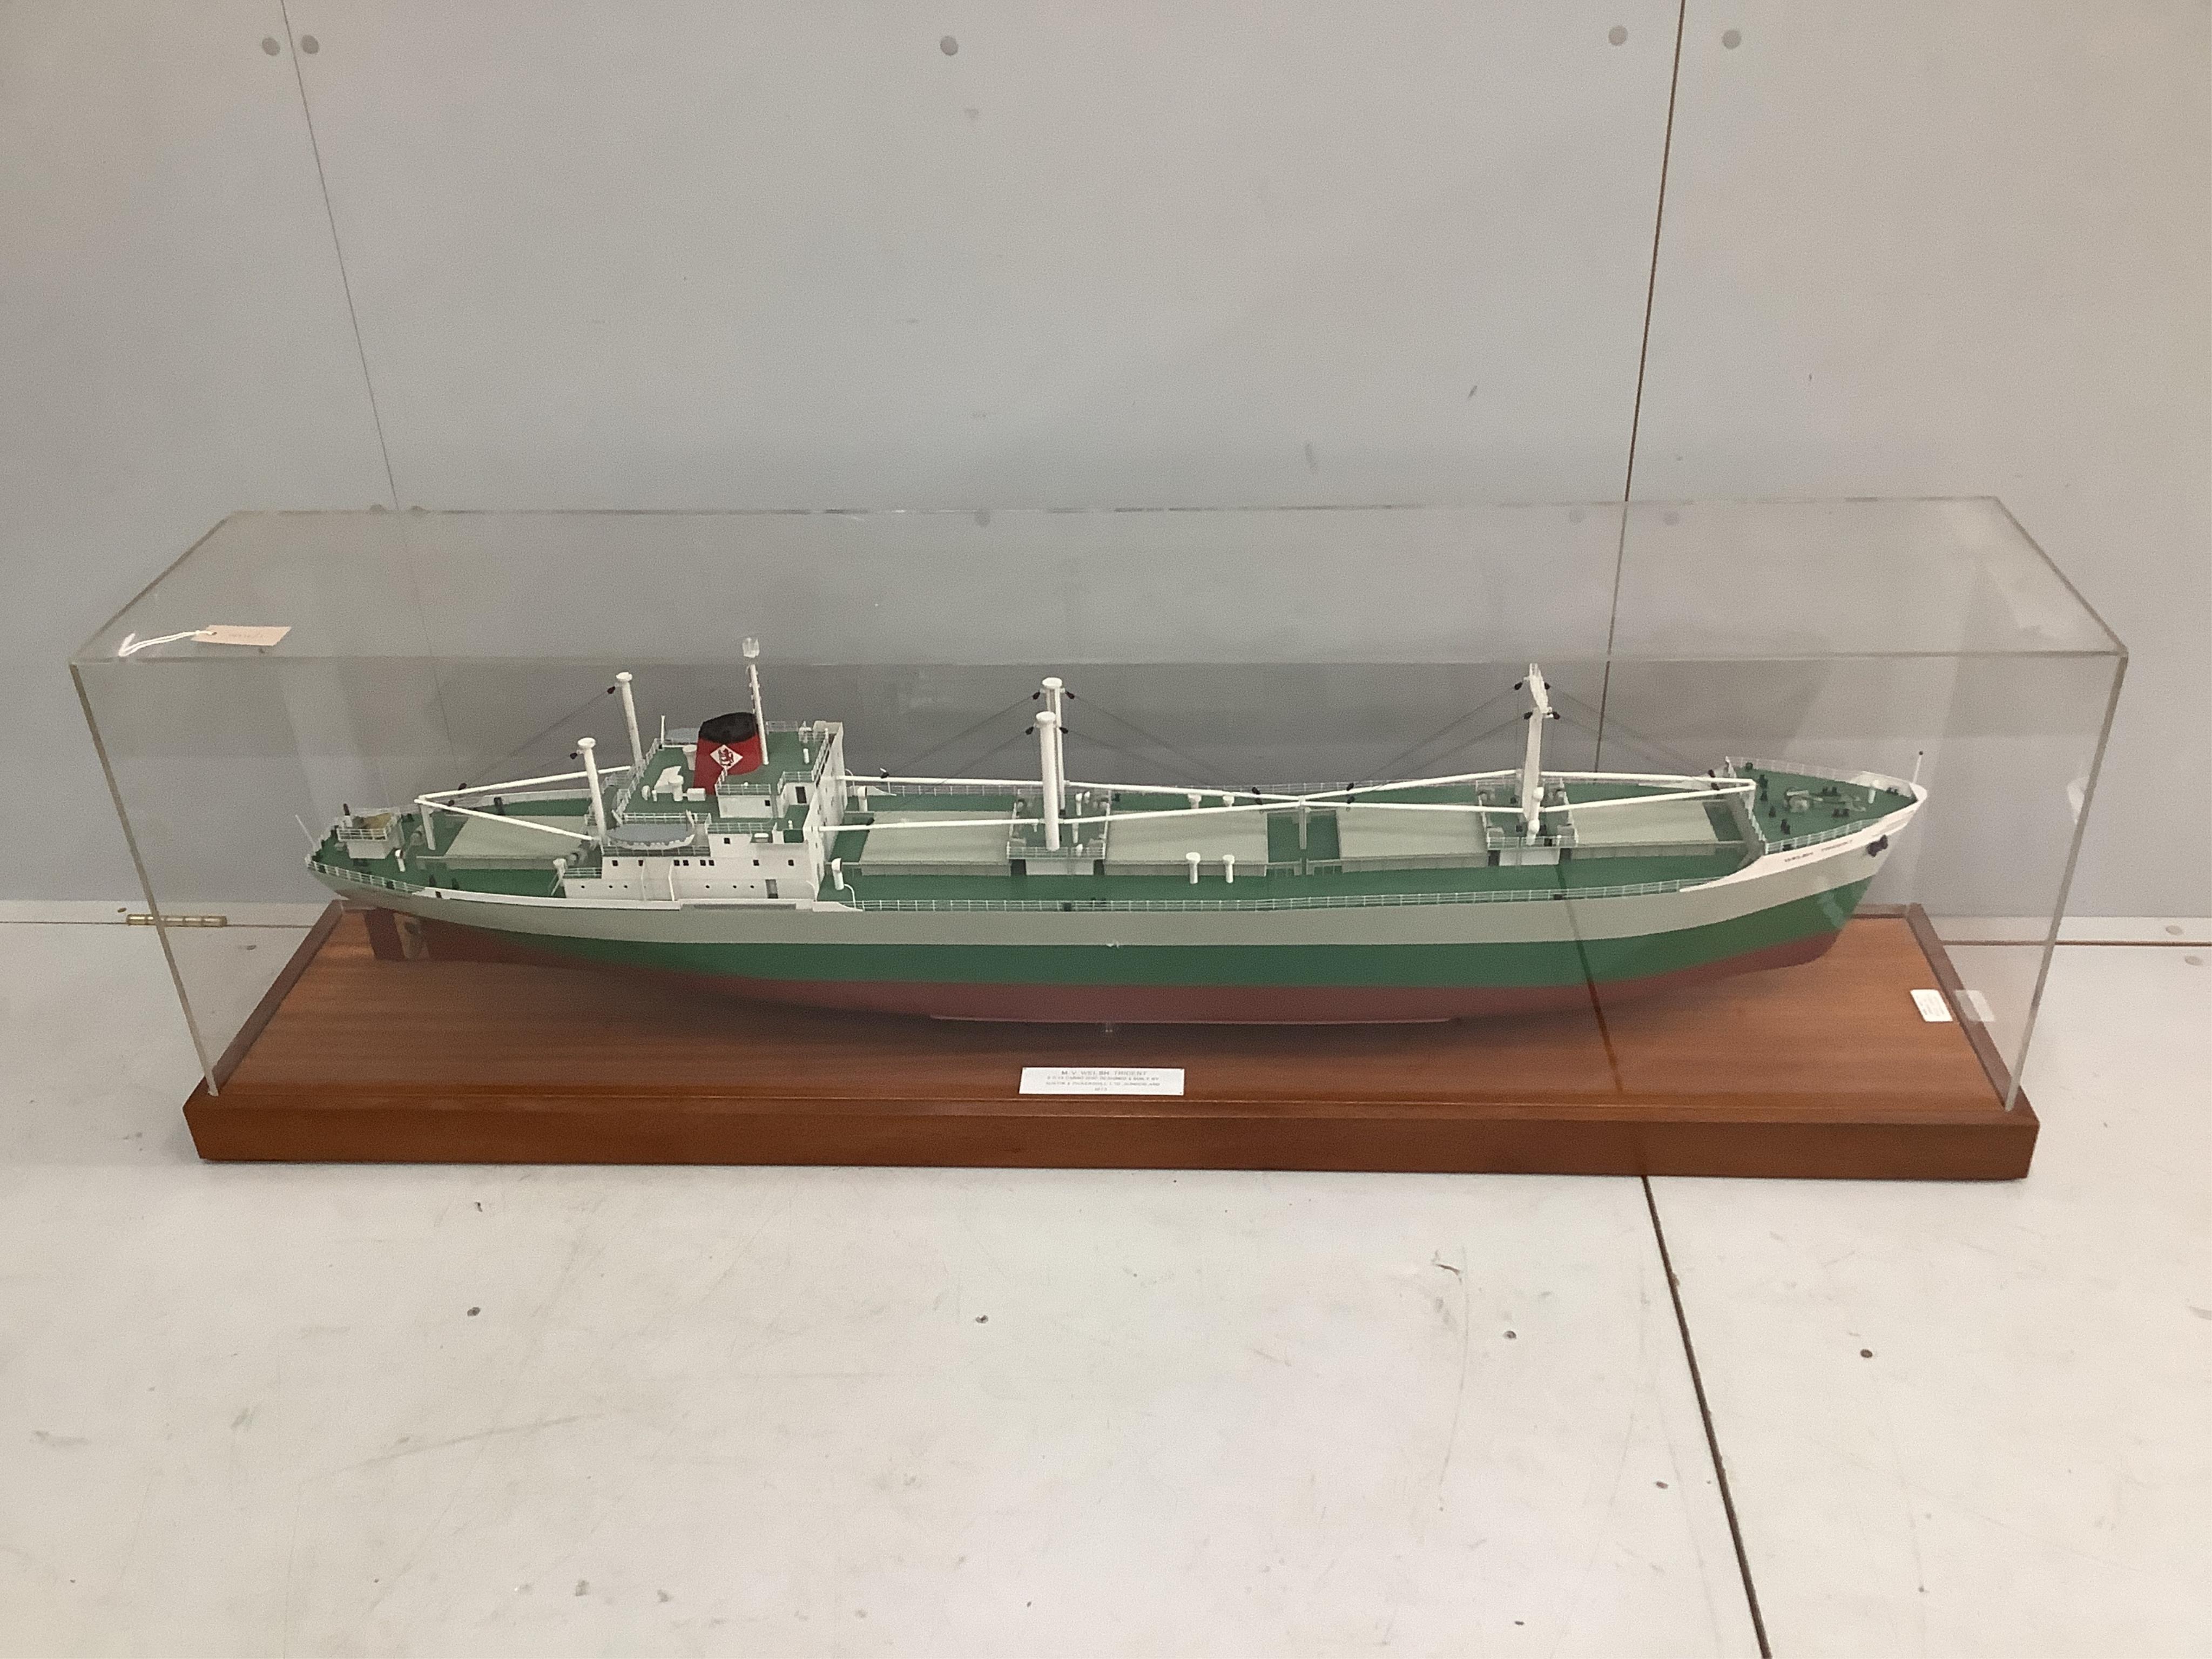 A Norman Hill scale model of the M.V. Welsh Trident, S.D. 14 cargo ship designed and built by Austin and Pickersgill Ltd, Sunderland 1973, case width 166cm, depth 35cm, height 51cm. Condition - good